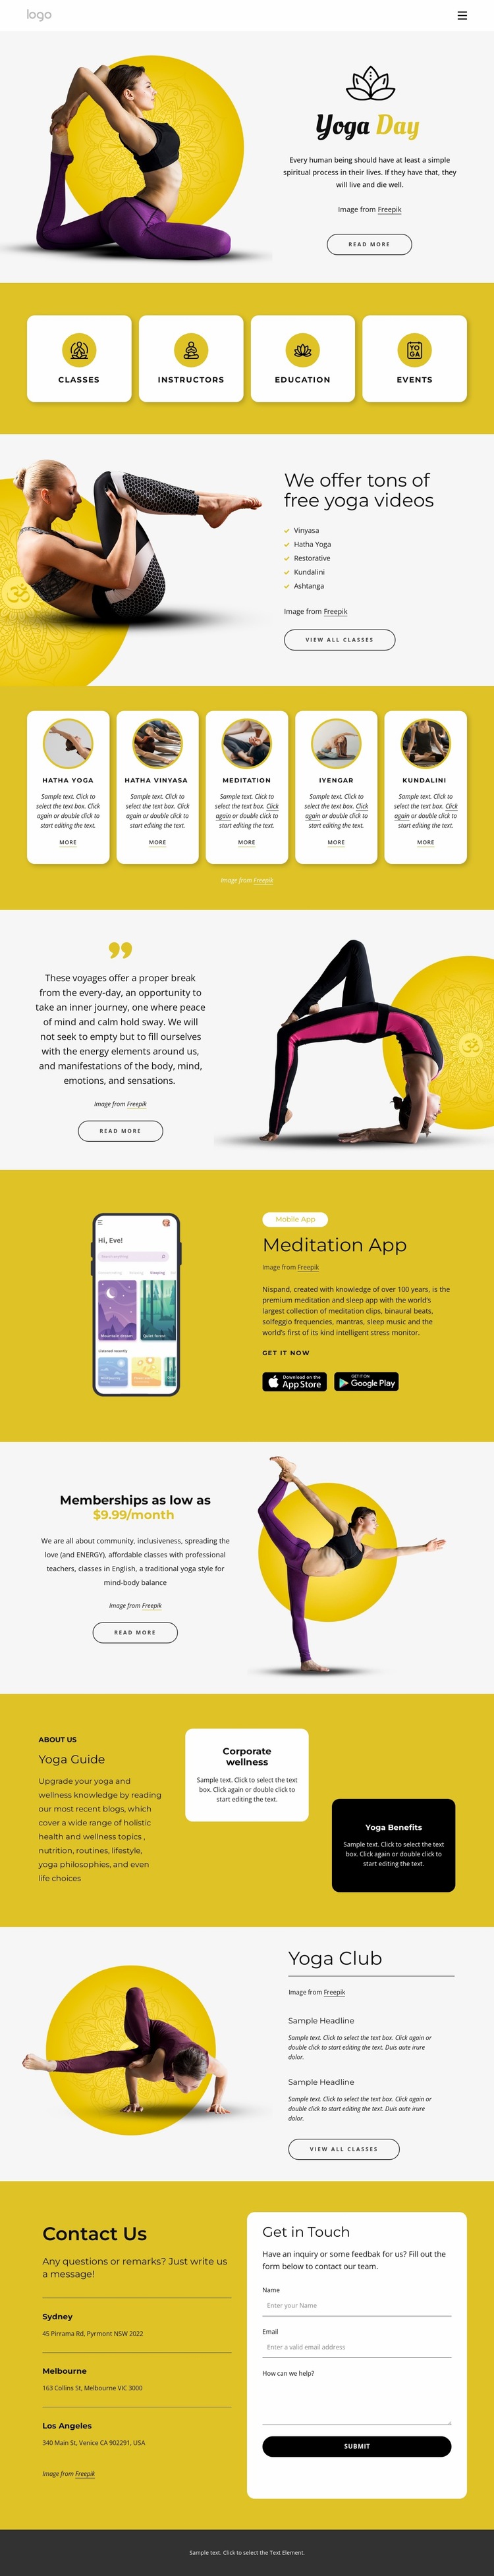 Yoga events and classes Website Builder Templates